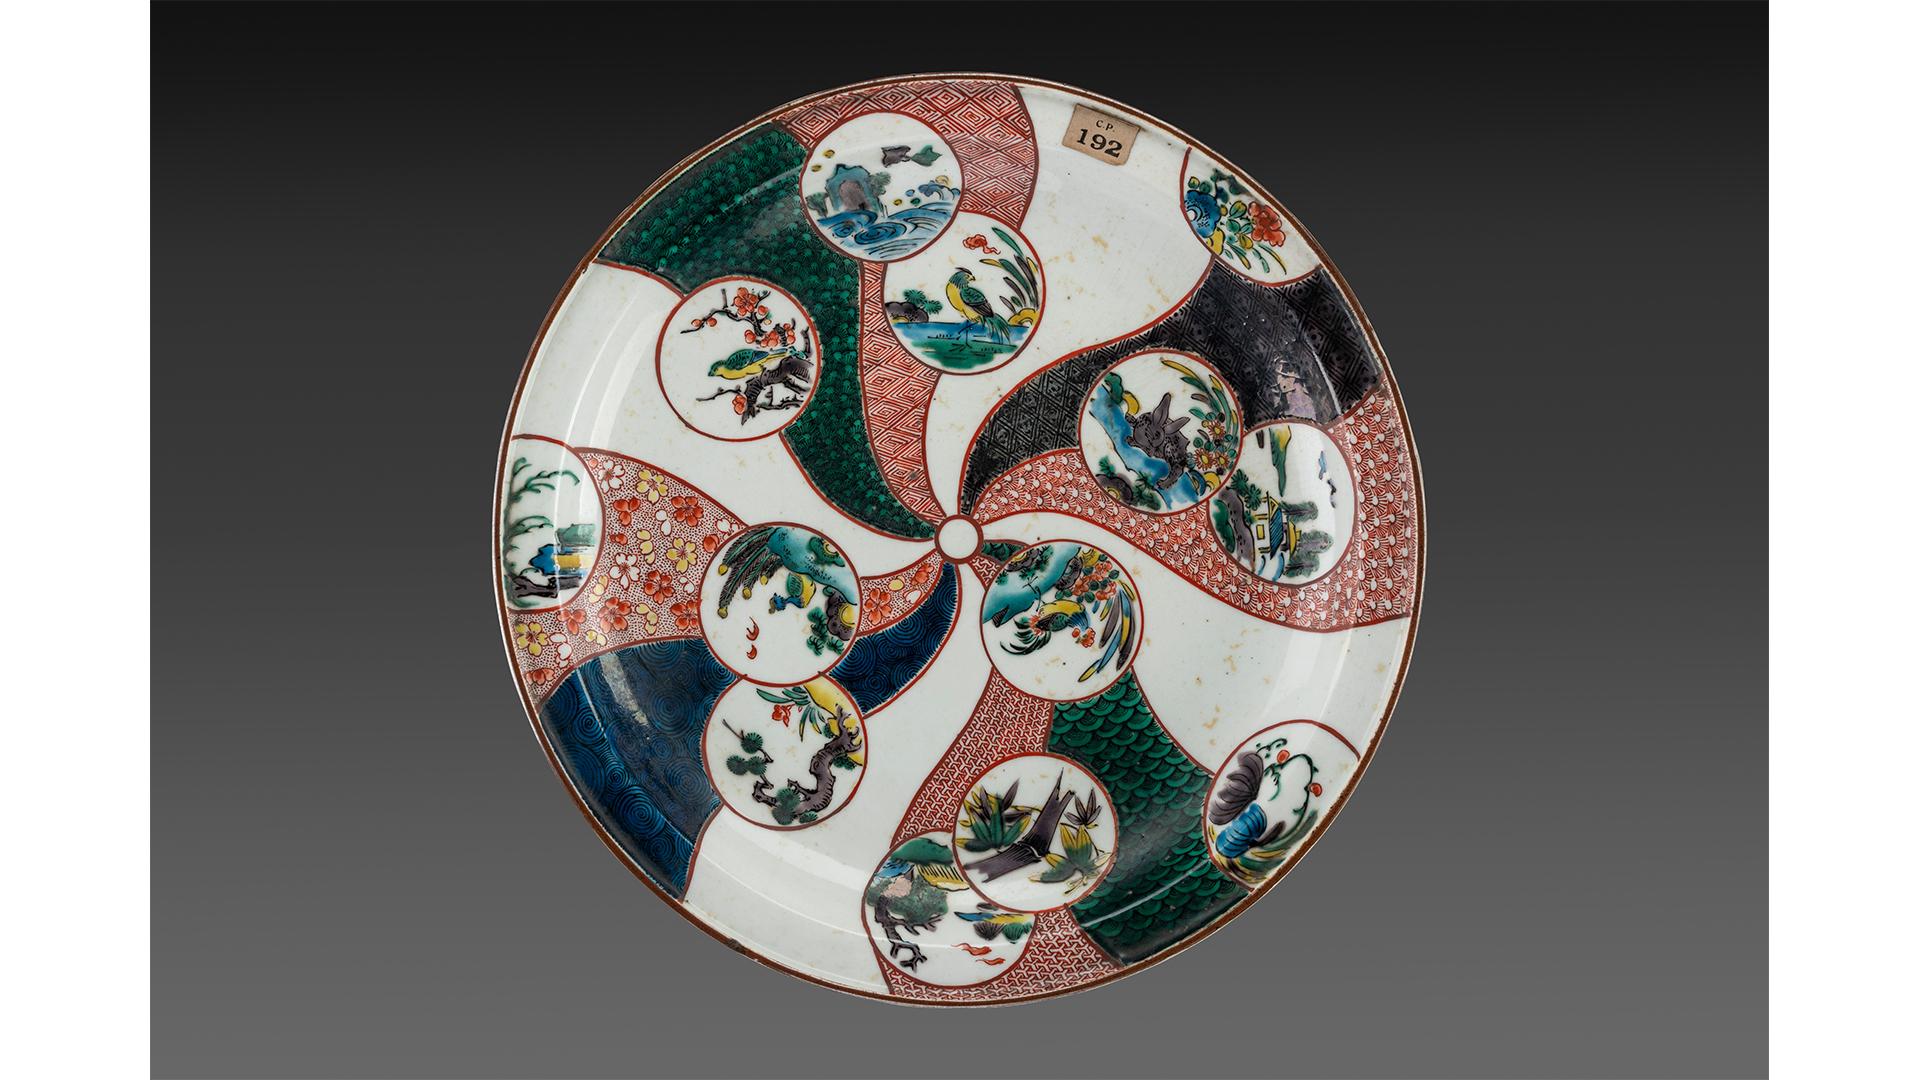 Kutani porcelain plate decorated with birds and peony design in green,19th century, Japan on display at csmvs museum Mumbai India.jpg